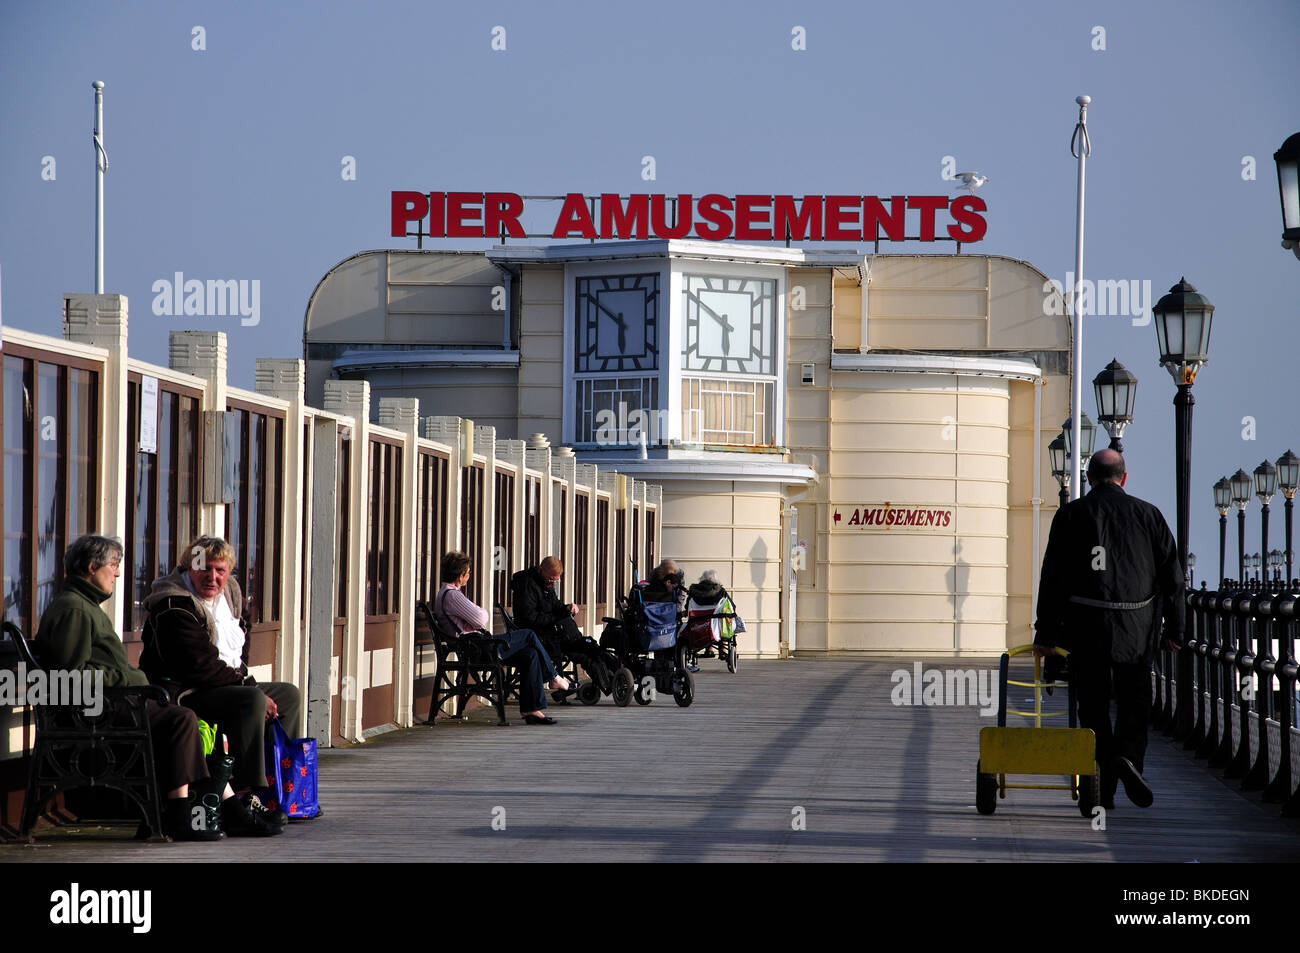 Sala giochi, Worthing Pier, Worthing, West Sussex, in Inghilterra, Regno Unito Foto Stock